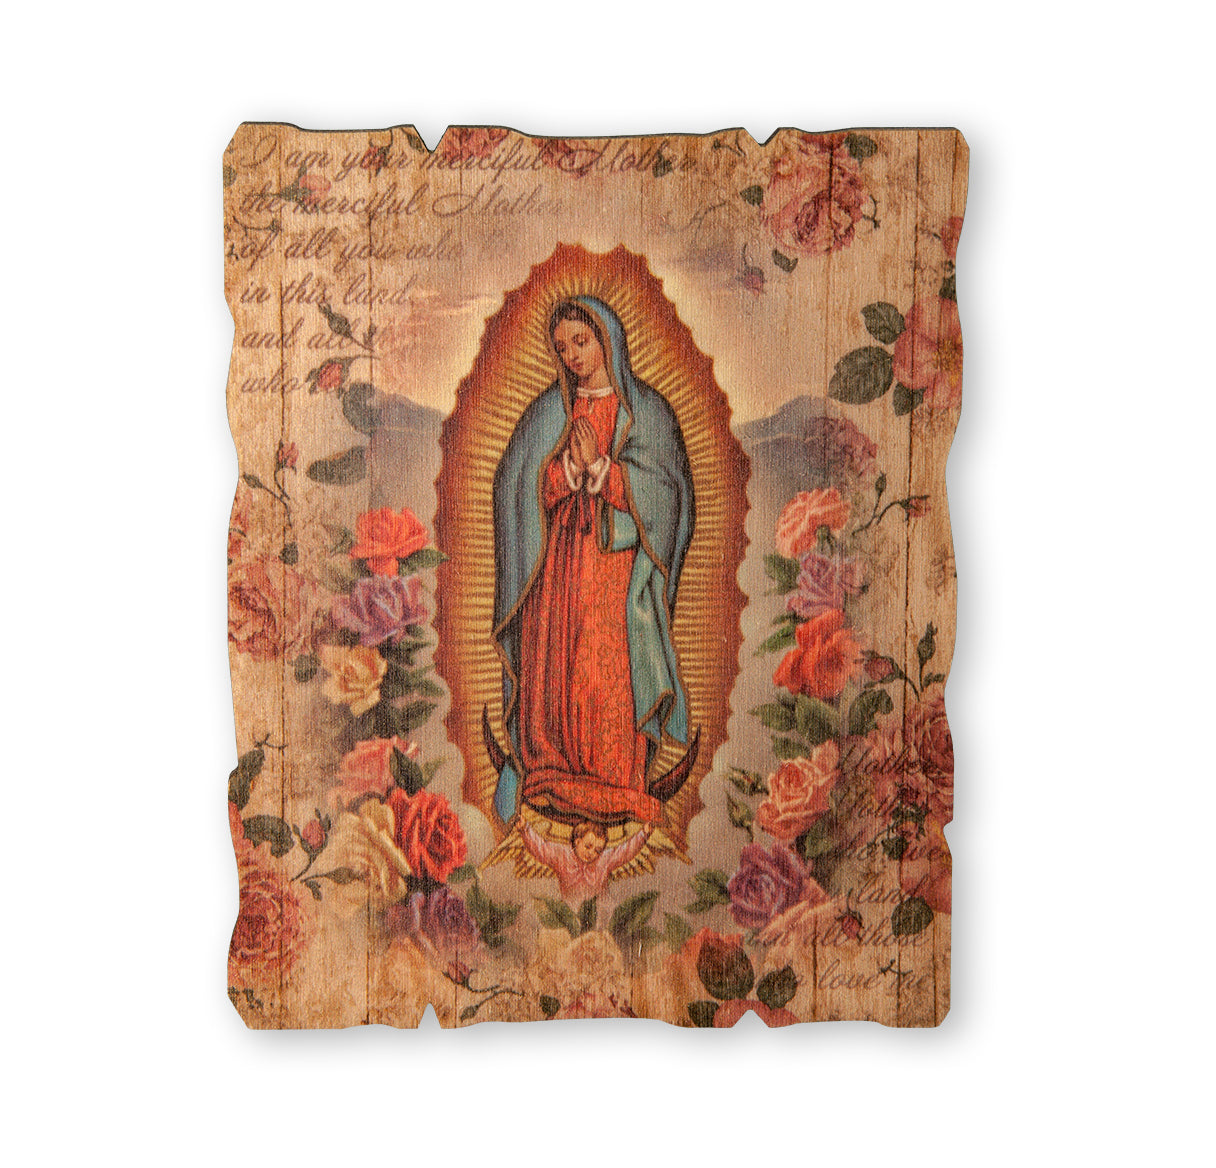 Our Lady of Guadalupe Wood Wall Plaque